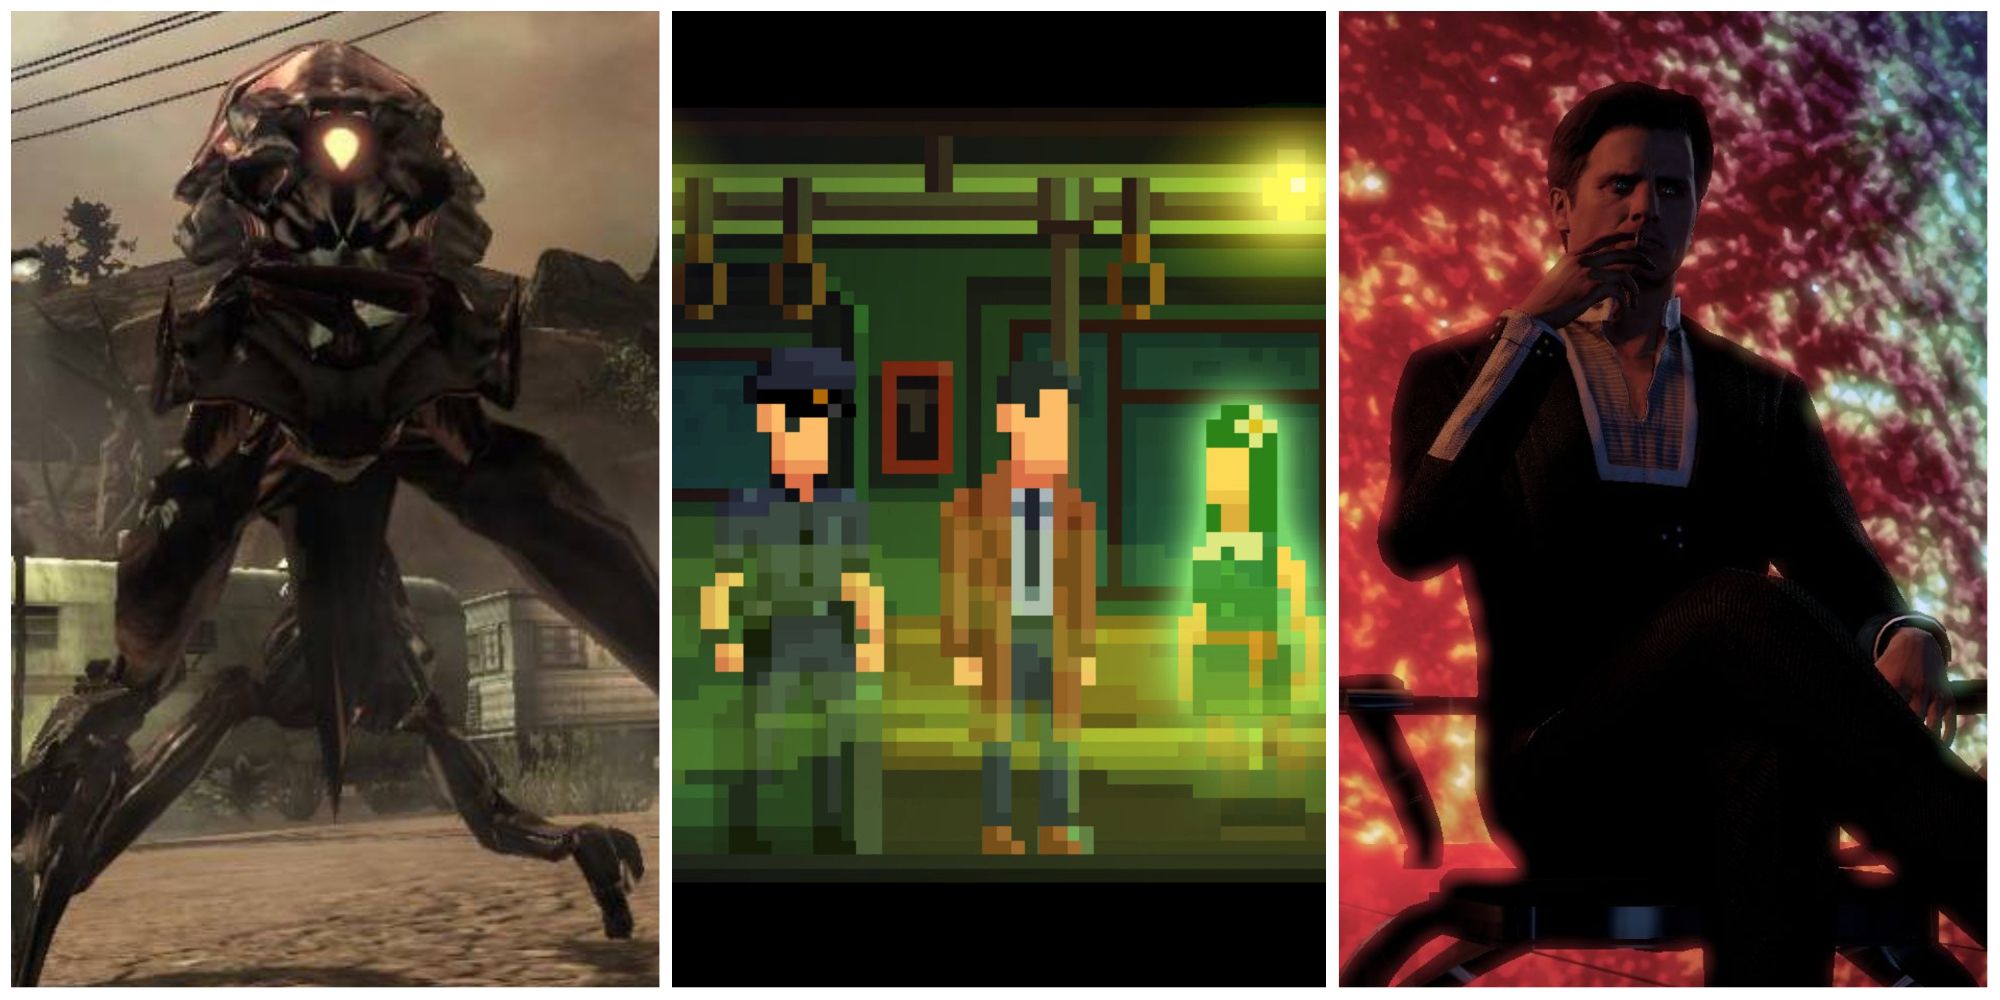 Left: An insectoid alien from BlackSite: Area 51. Middle: A police officer and a detective interrogating a ghost girl on a train in The Darkside Detective. Right: The Illusive Man from Mass Effect 2. Image sources: as.com and gamezxc.com.